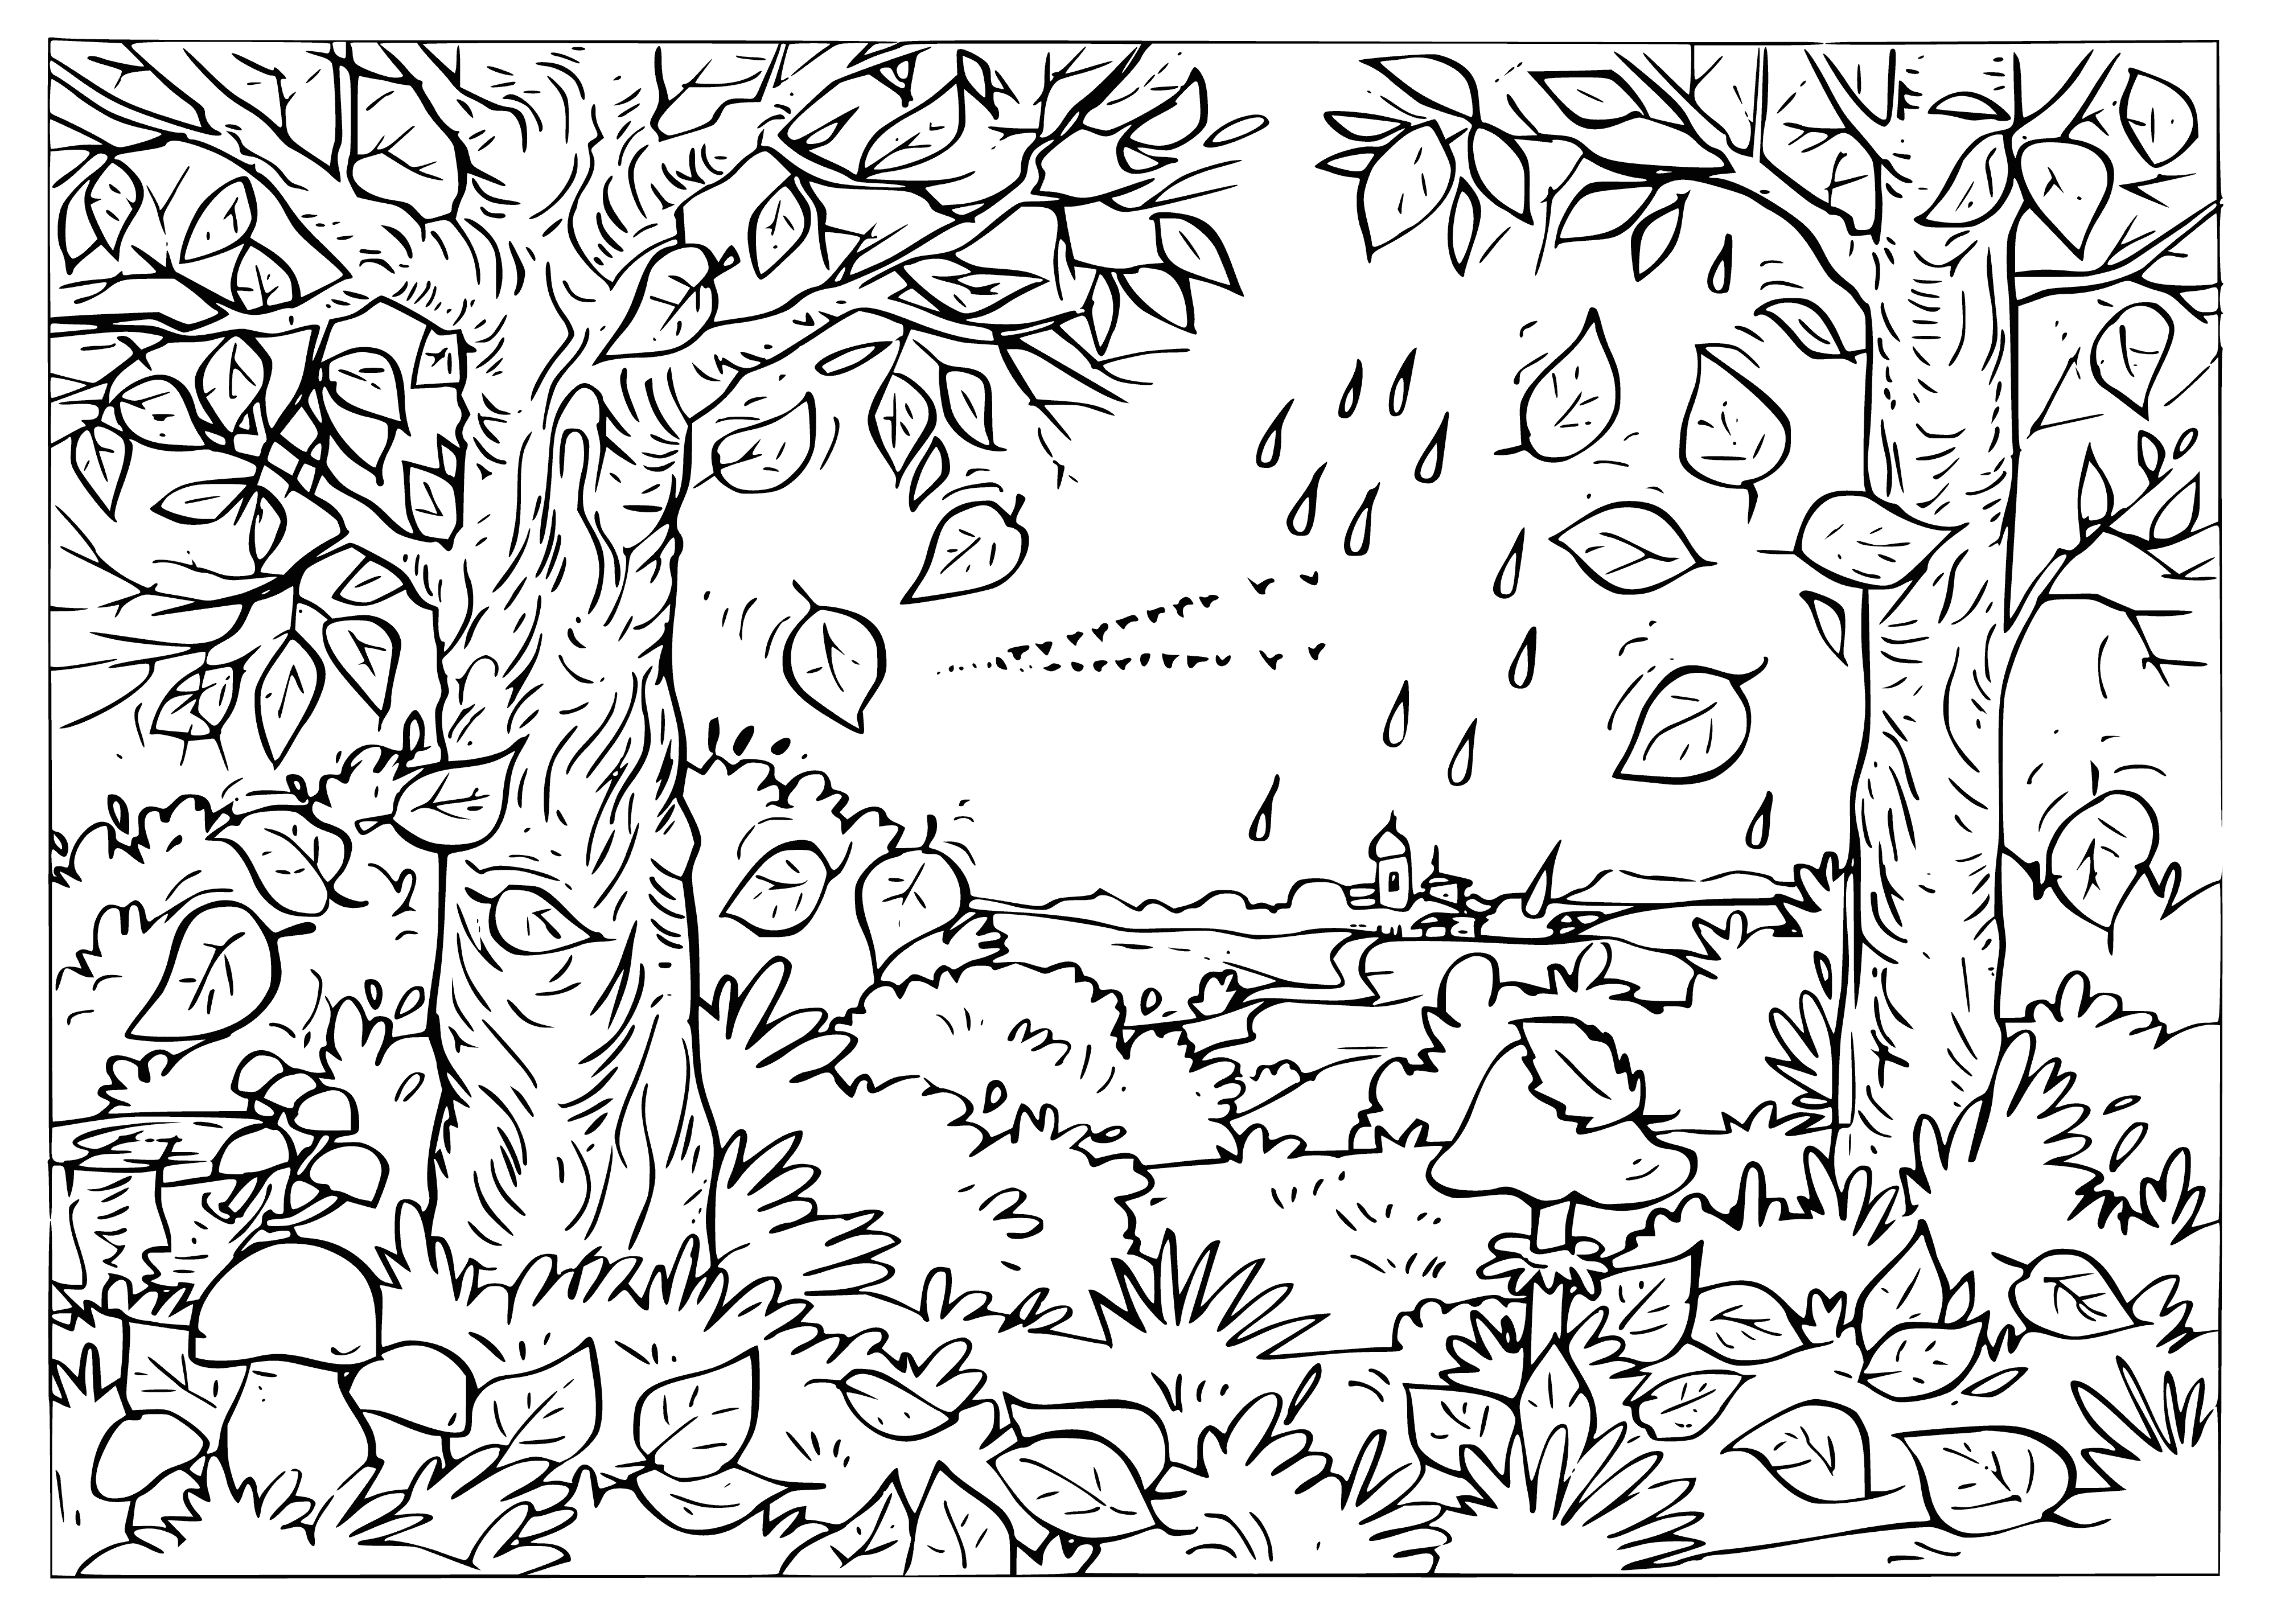 coloring page: Leaves falling, pumpkins on the ground, fire-colored sky & sun-kissed grass, Autumn is here!